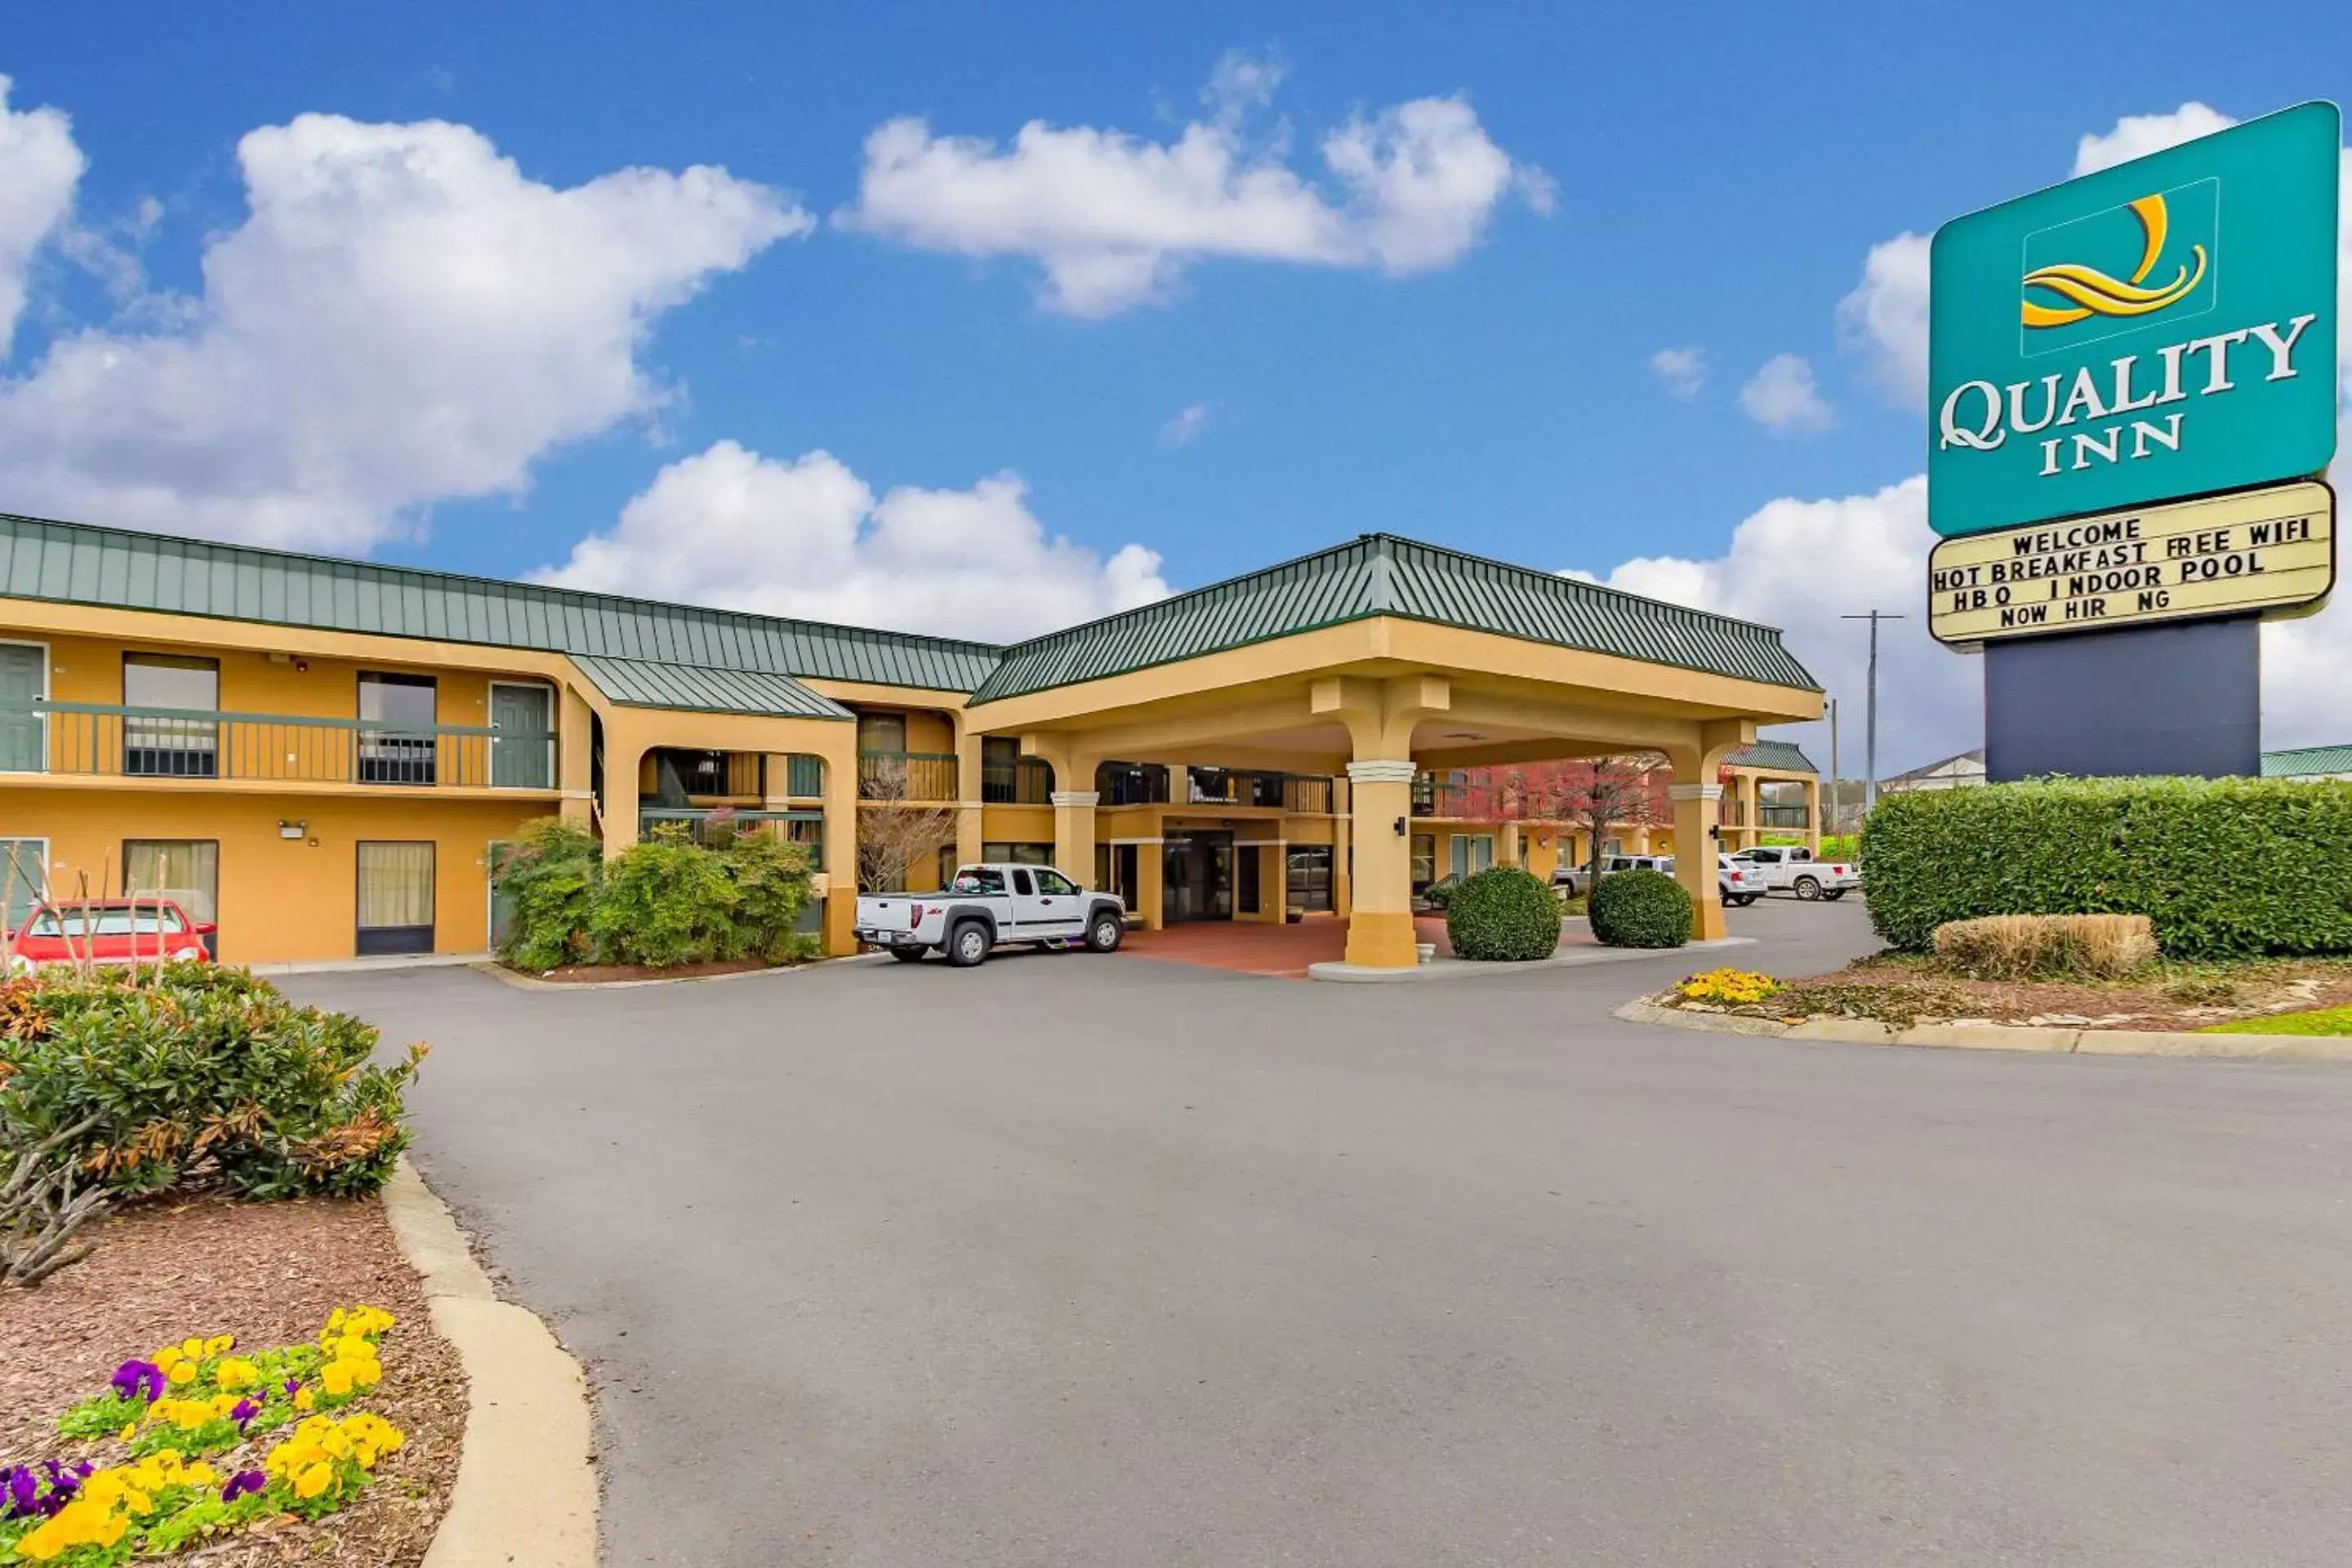 Property building in Quality Inn Goodlettsville